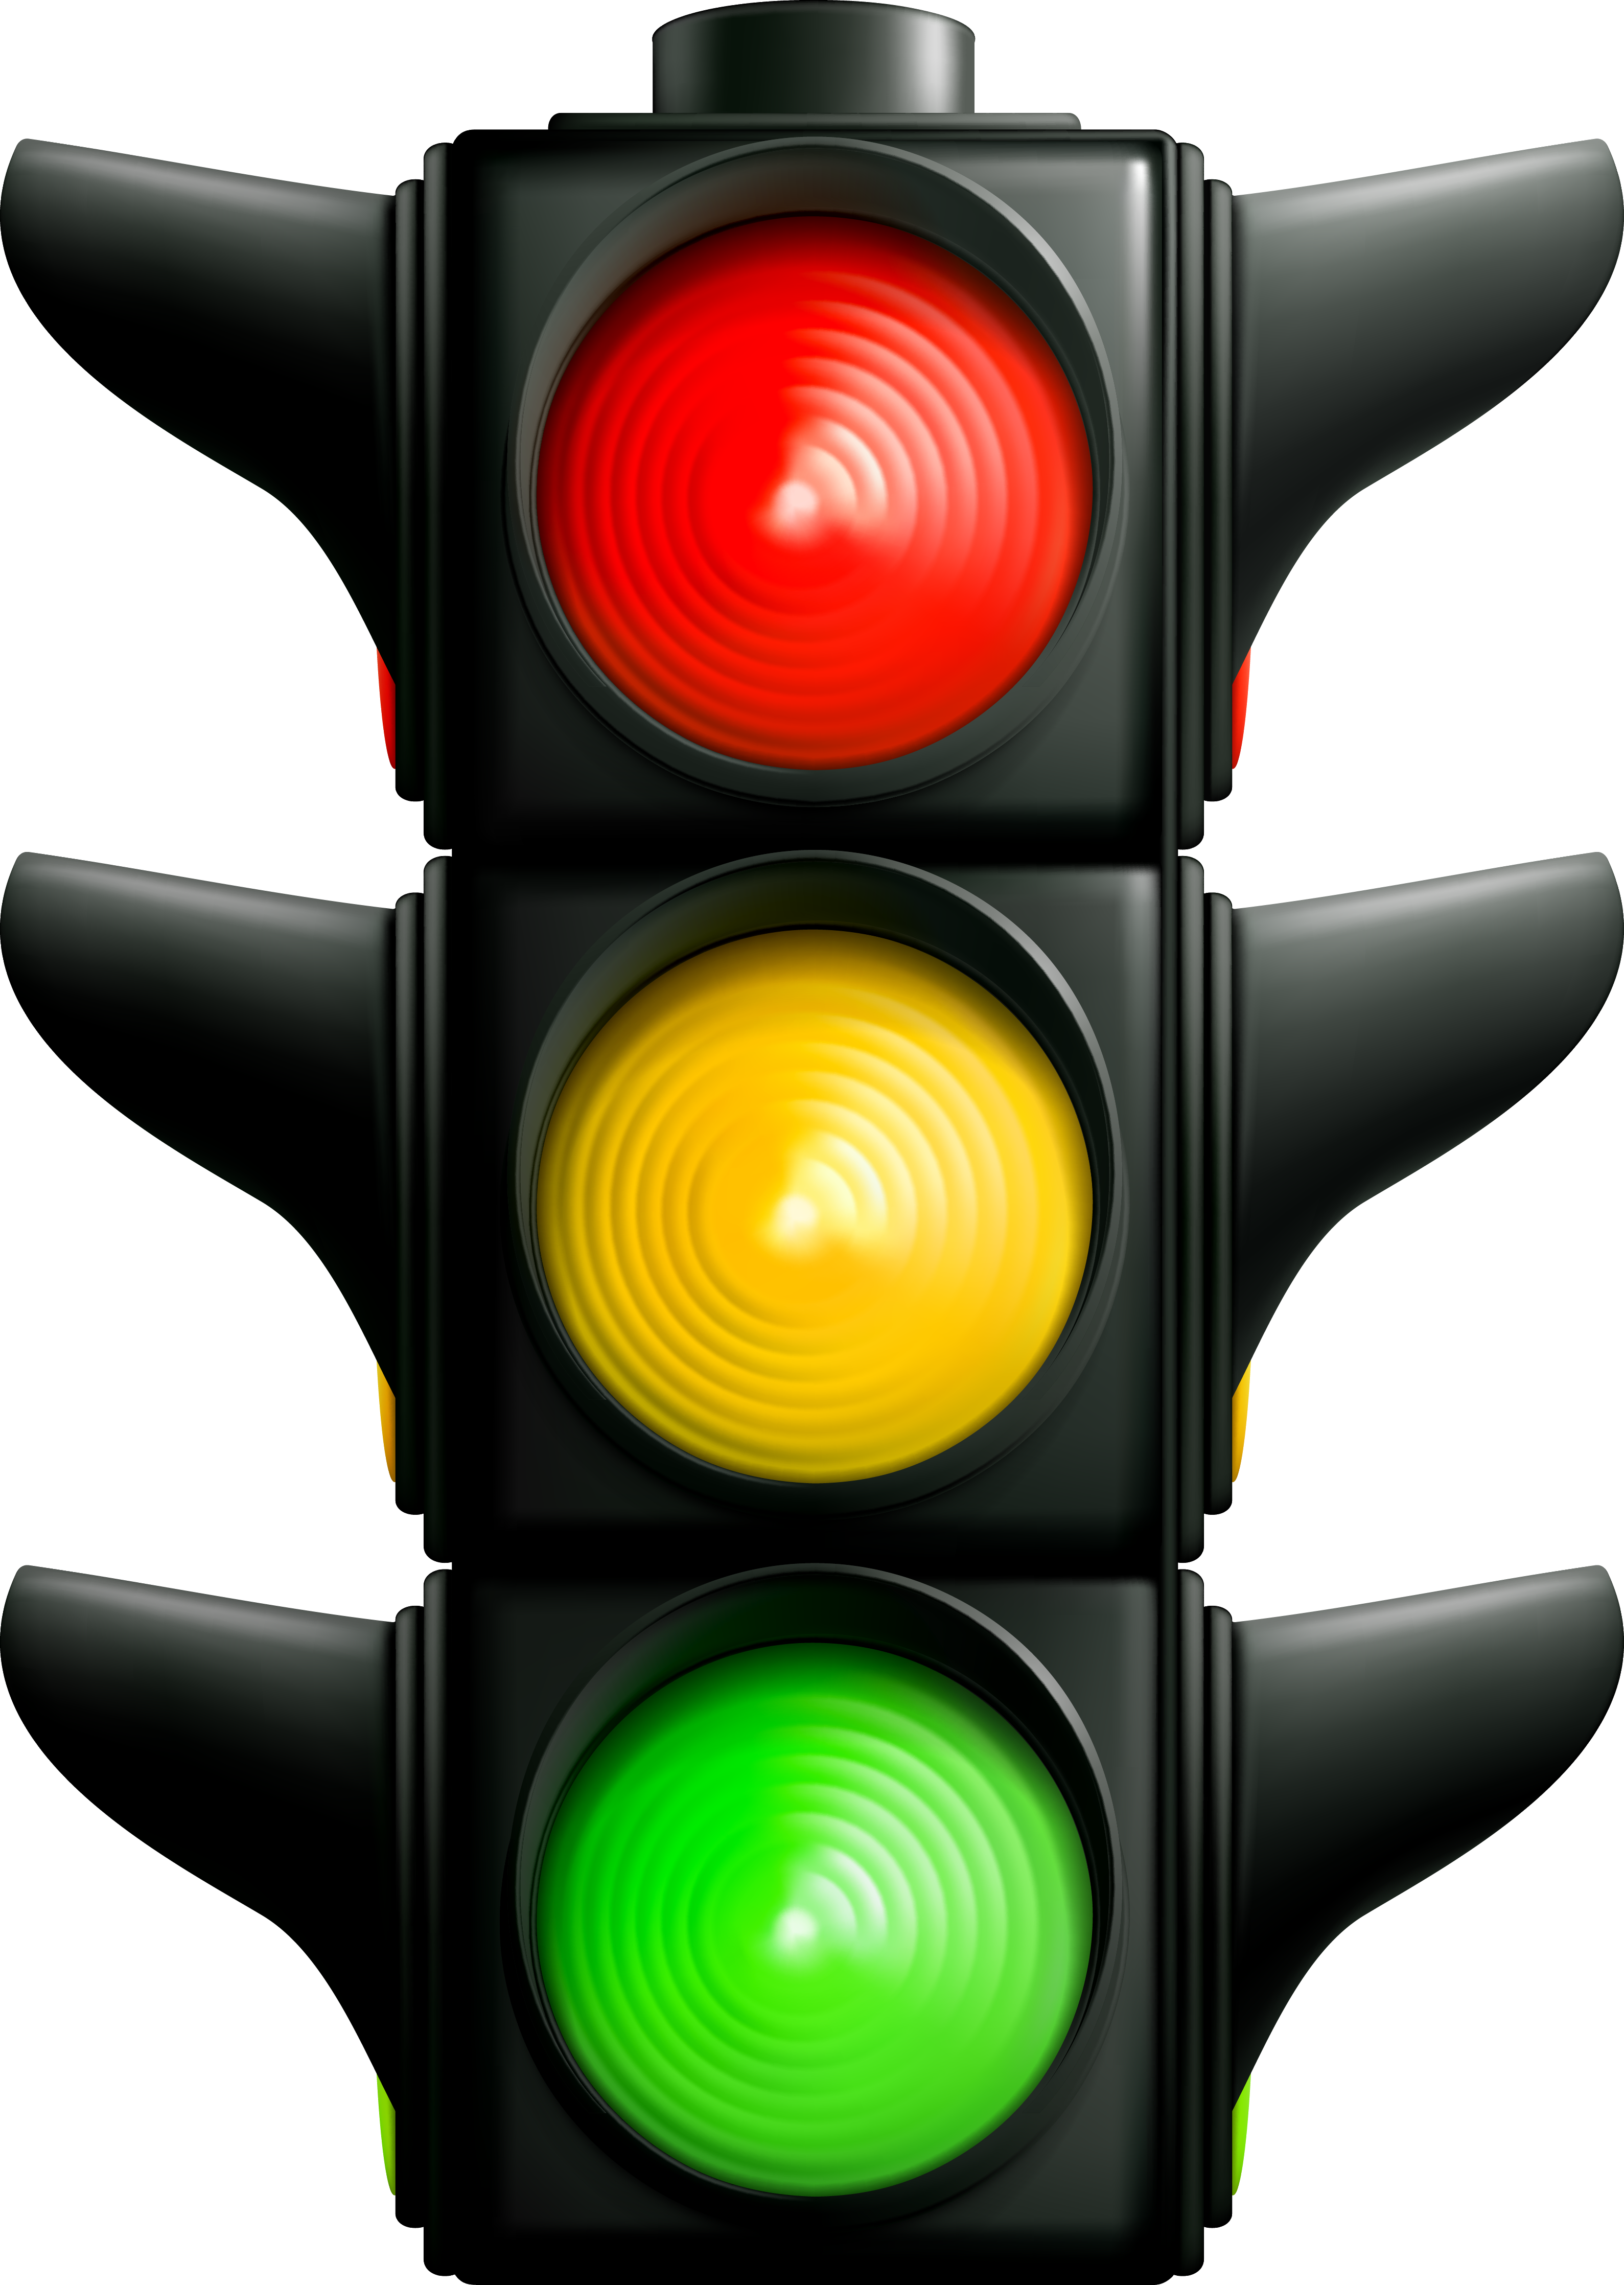 Traffic light PNG images free download.